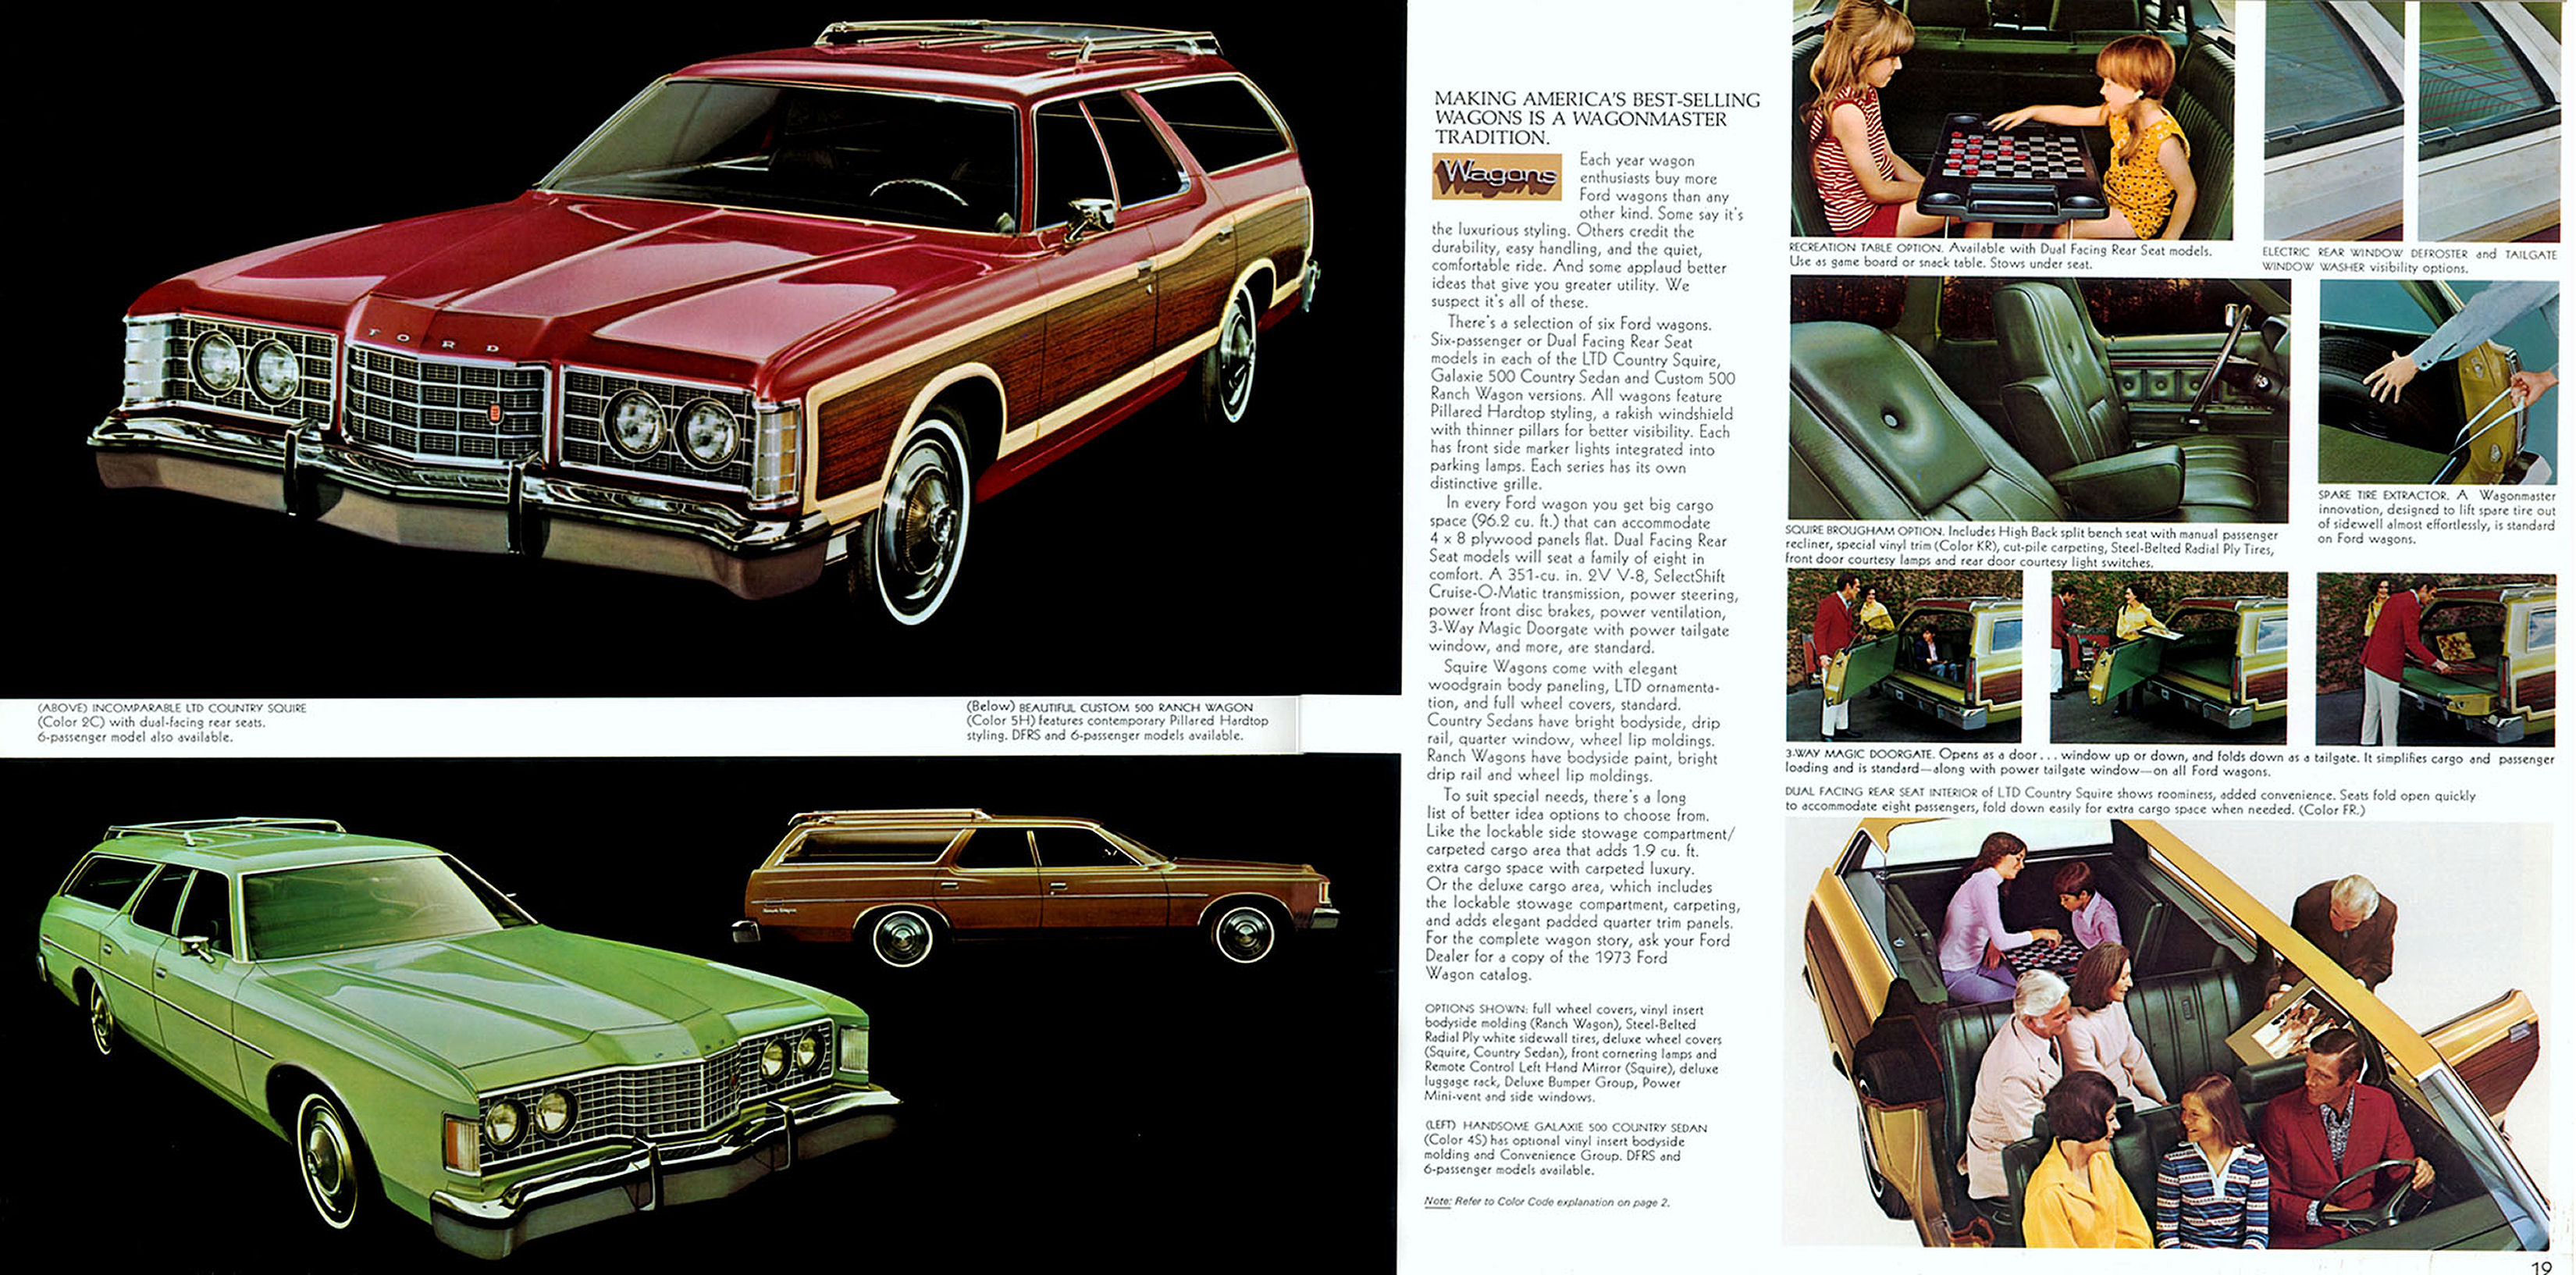 1973_Ford_Full_Size-18-19